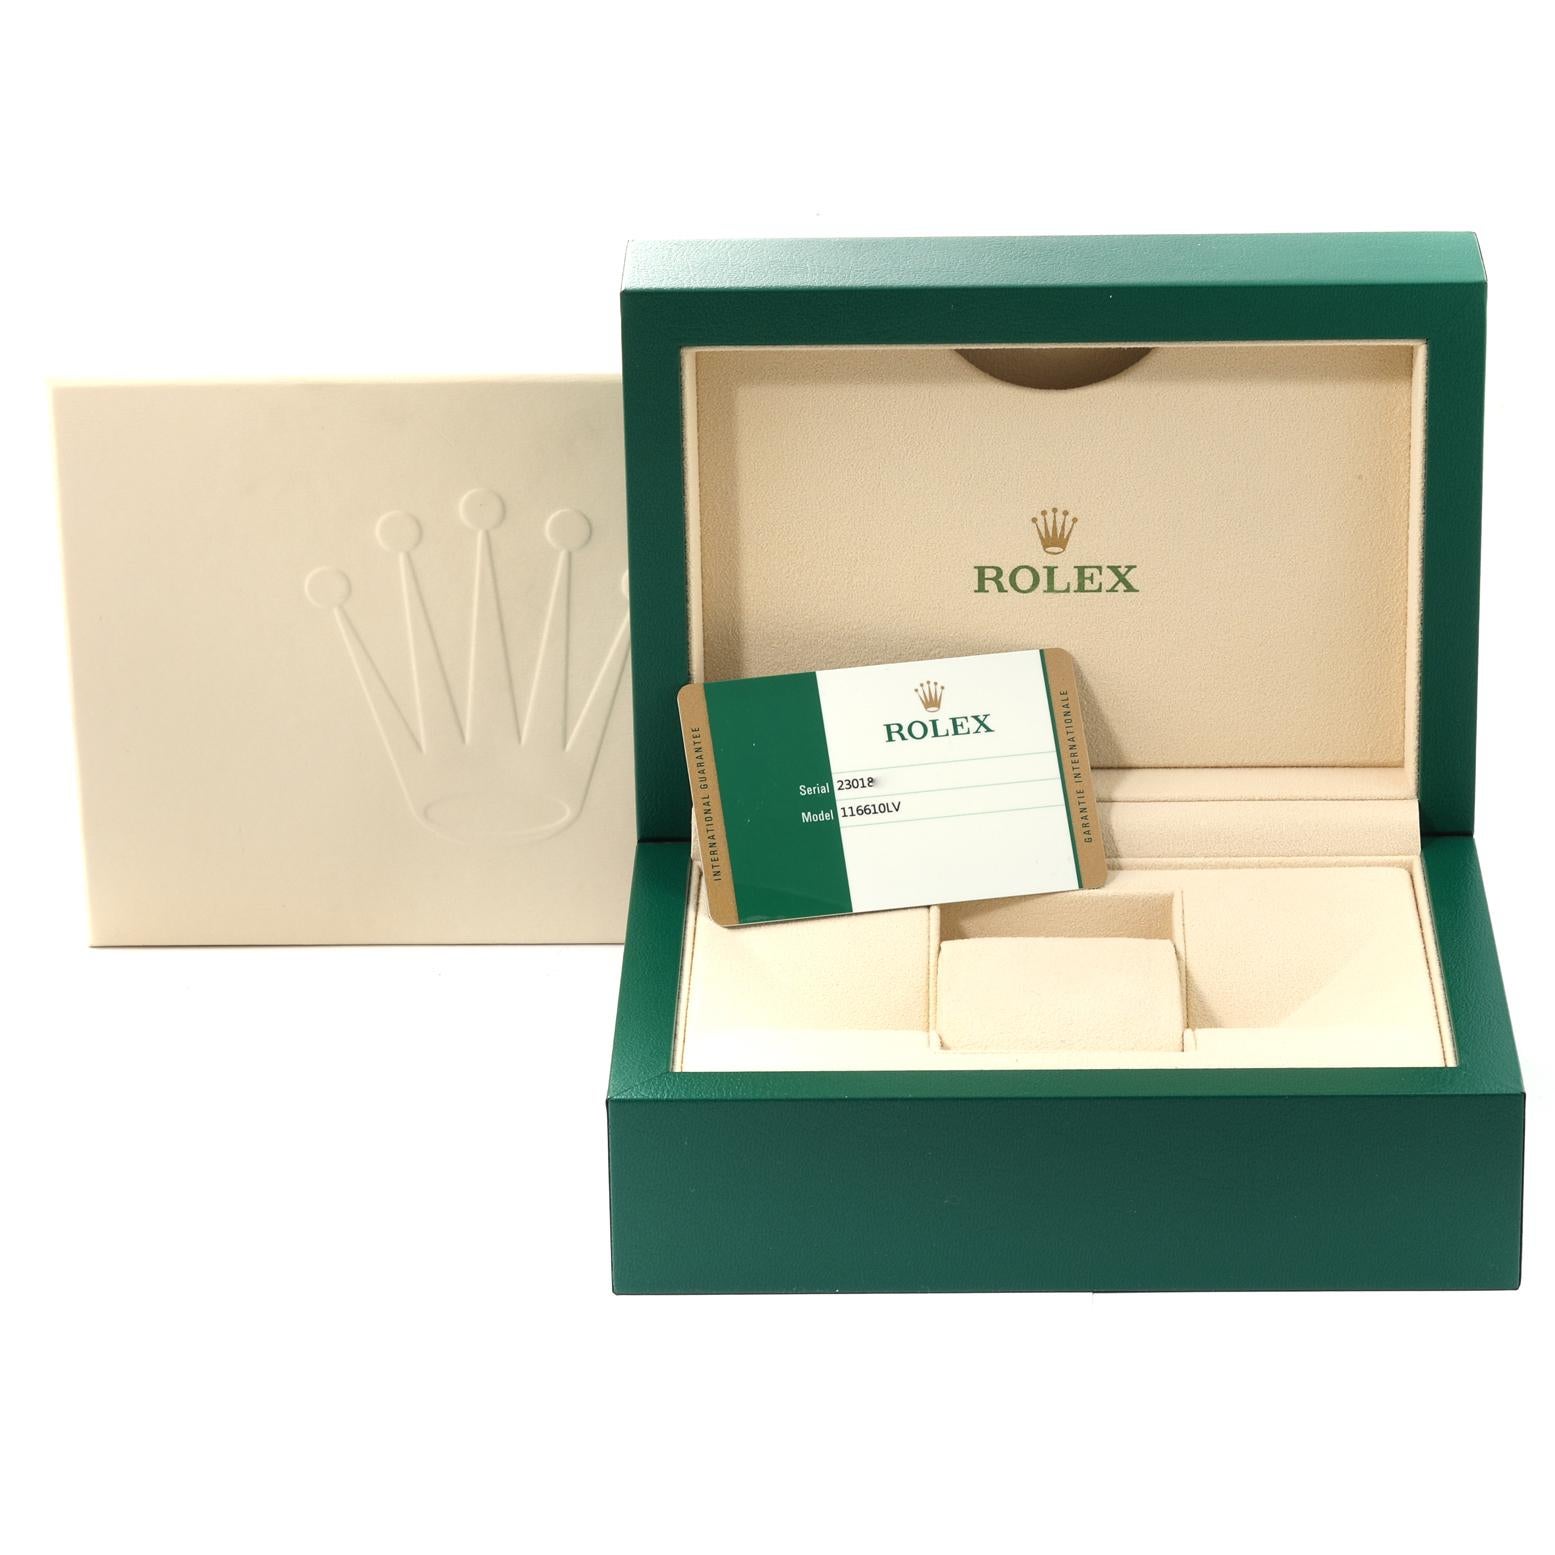 Rolex Submariner Hulk Green Dial Steel Mens Watch 116610LV Box Card For Sale 7